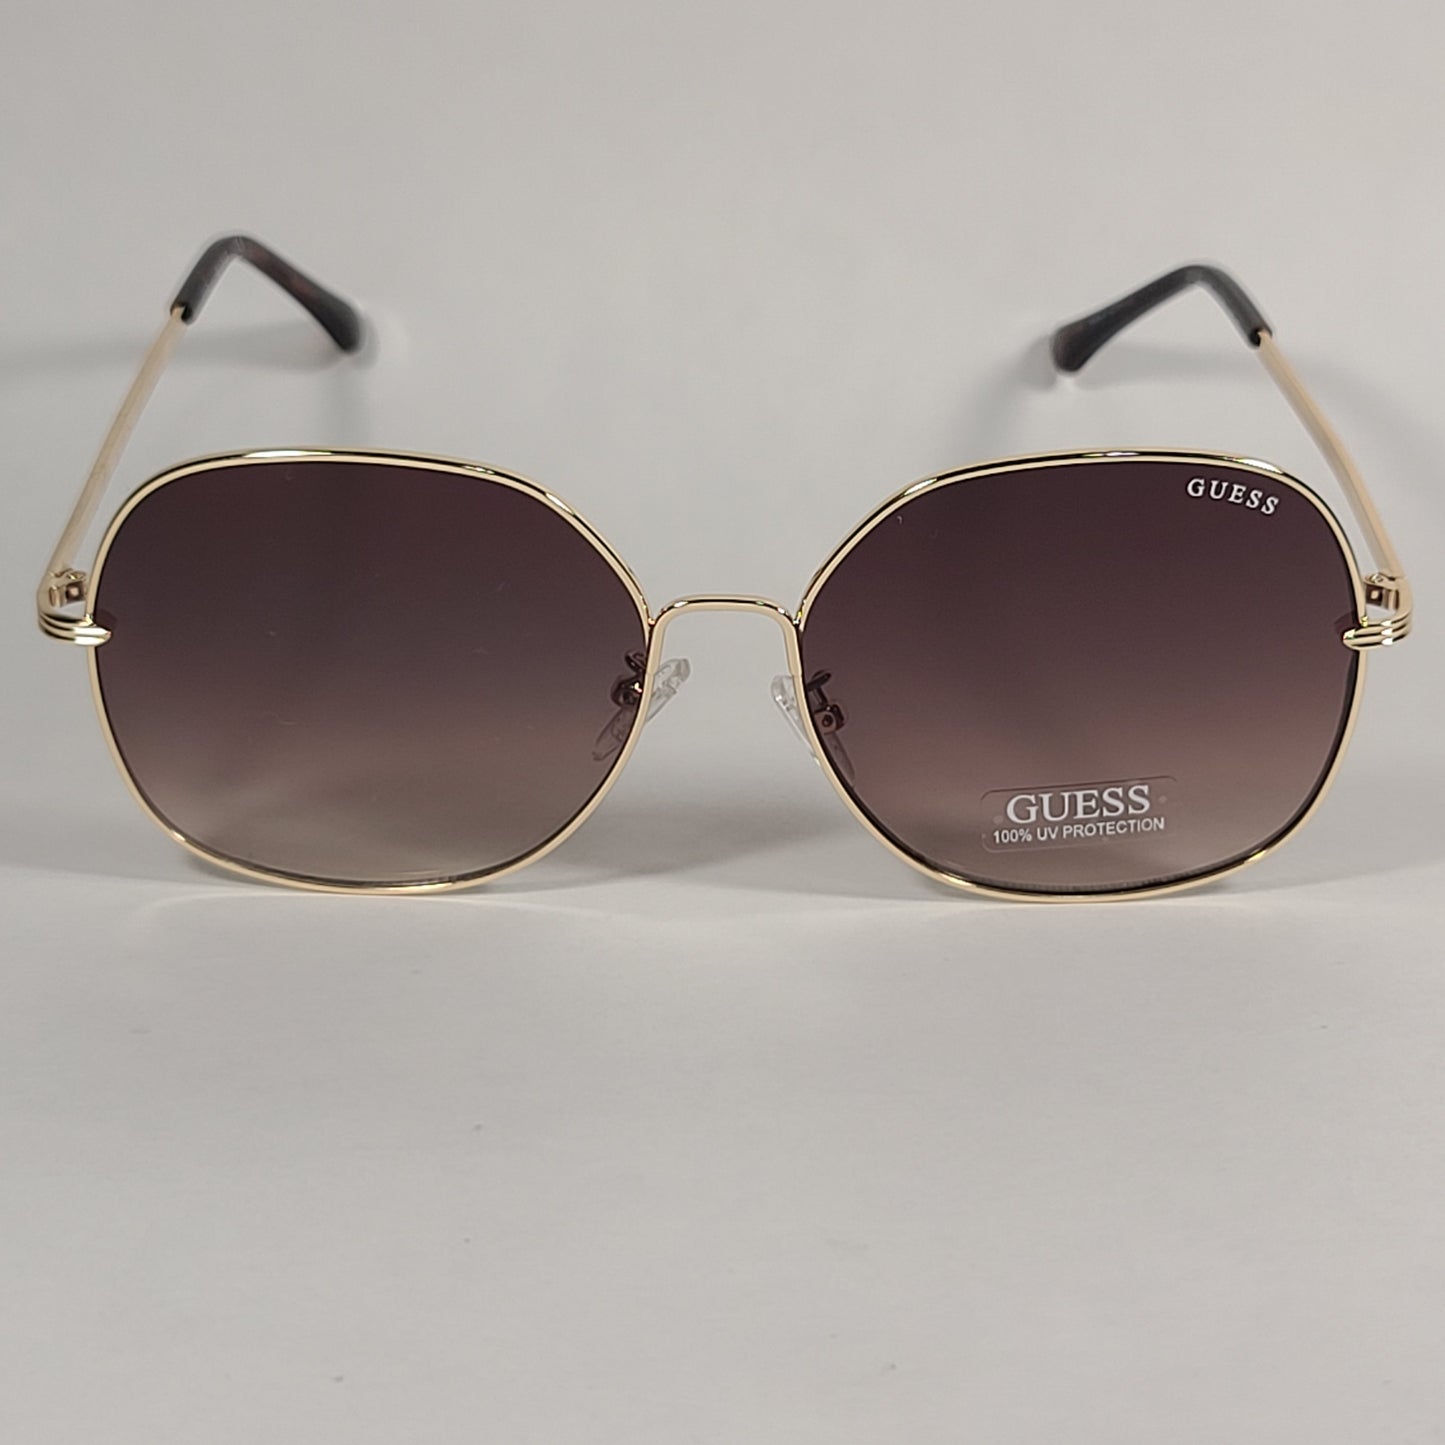 Guess Oversized Round Butterfly Sunglasses Gold Tone Metal Frame Brown Gradient Lens GF0385 32F - Sunglasses